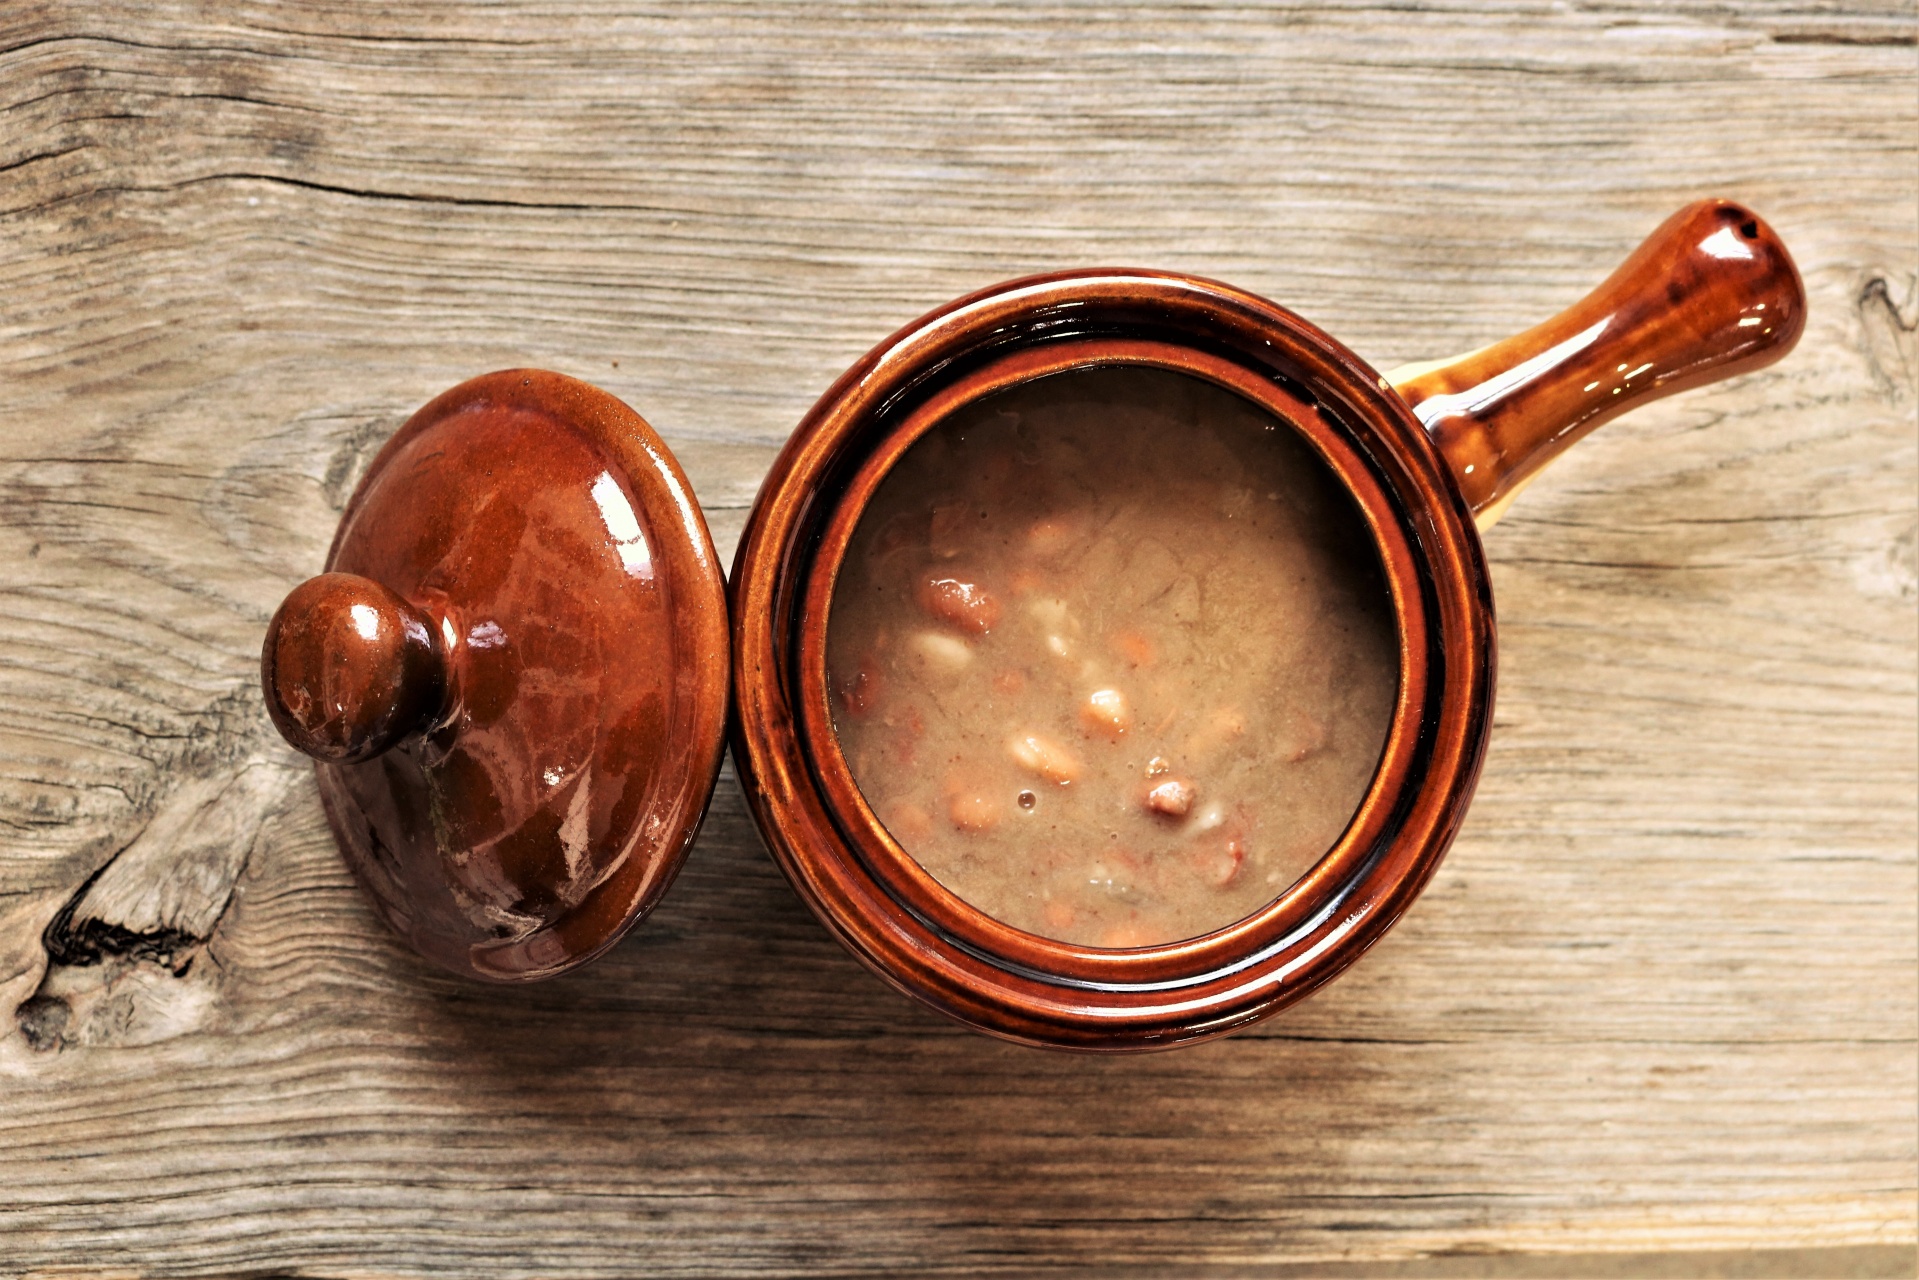 Top view of a vintage bean pot full of cooked pinto beans on a wood grain background.